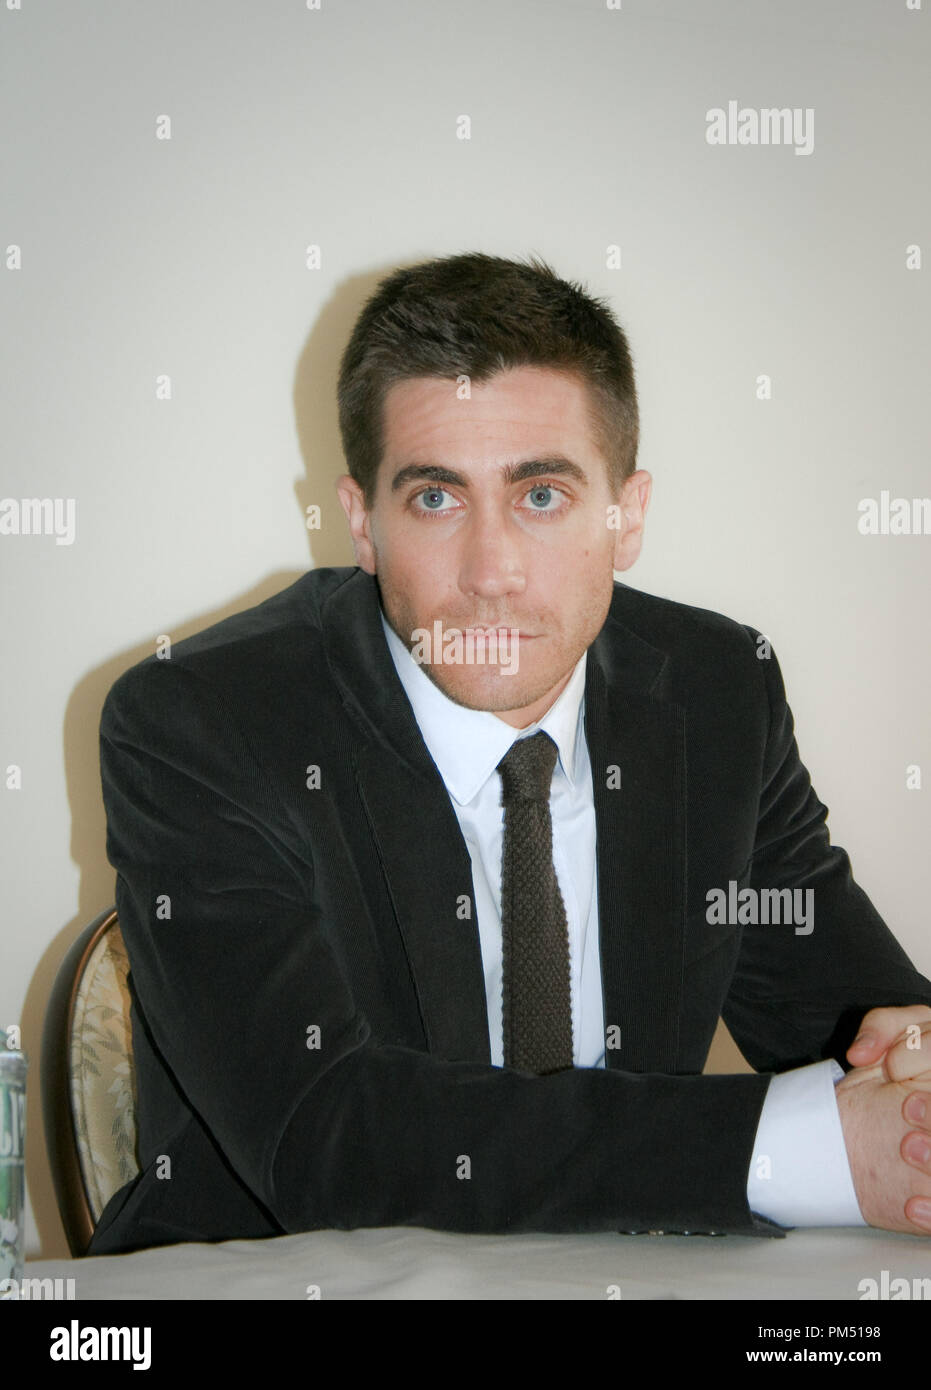 Jake Gyllenhaal, "Brothers" Portrait Session, December 3, 2009.  Reproduction by American tabloids is absolutely forbidden. File Reference #  30167 12JRC For Editorial Use Only - All Rights Reserved Stock Photo - Alamy